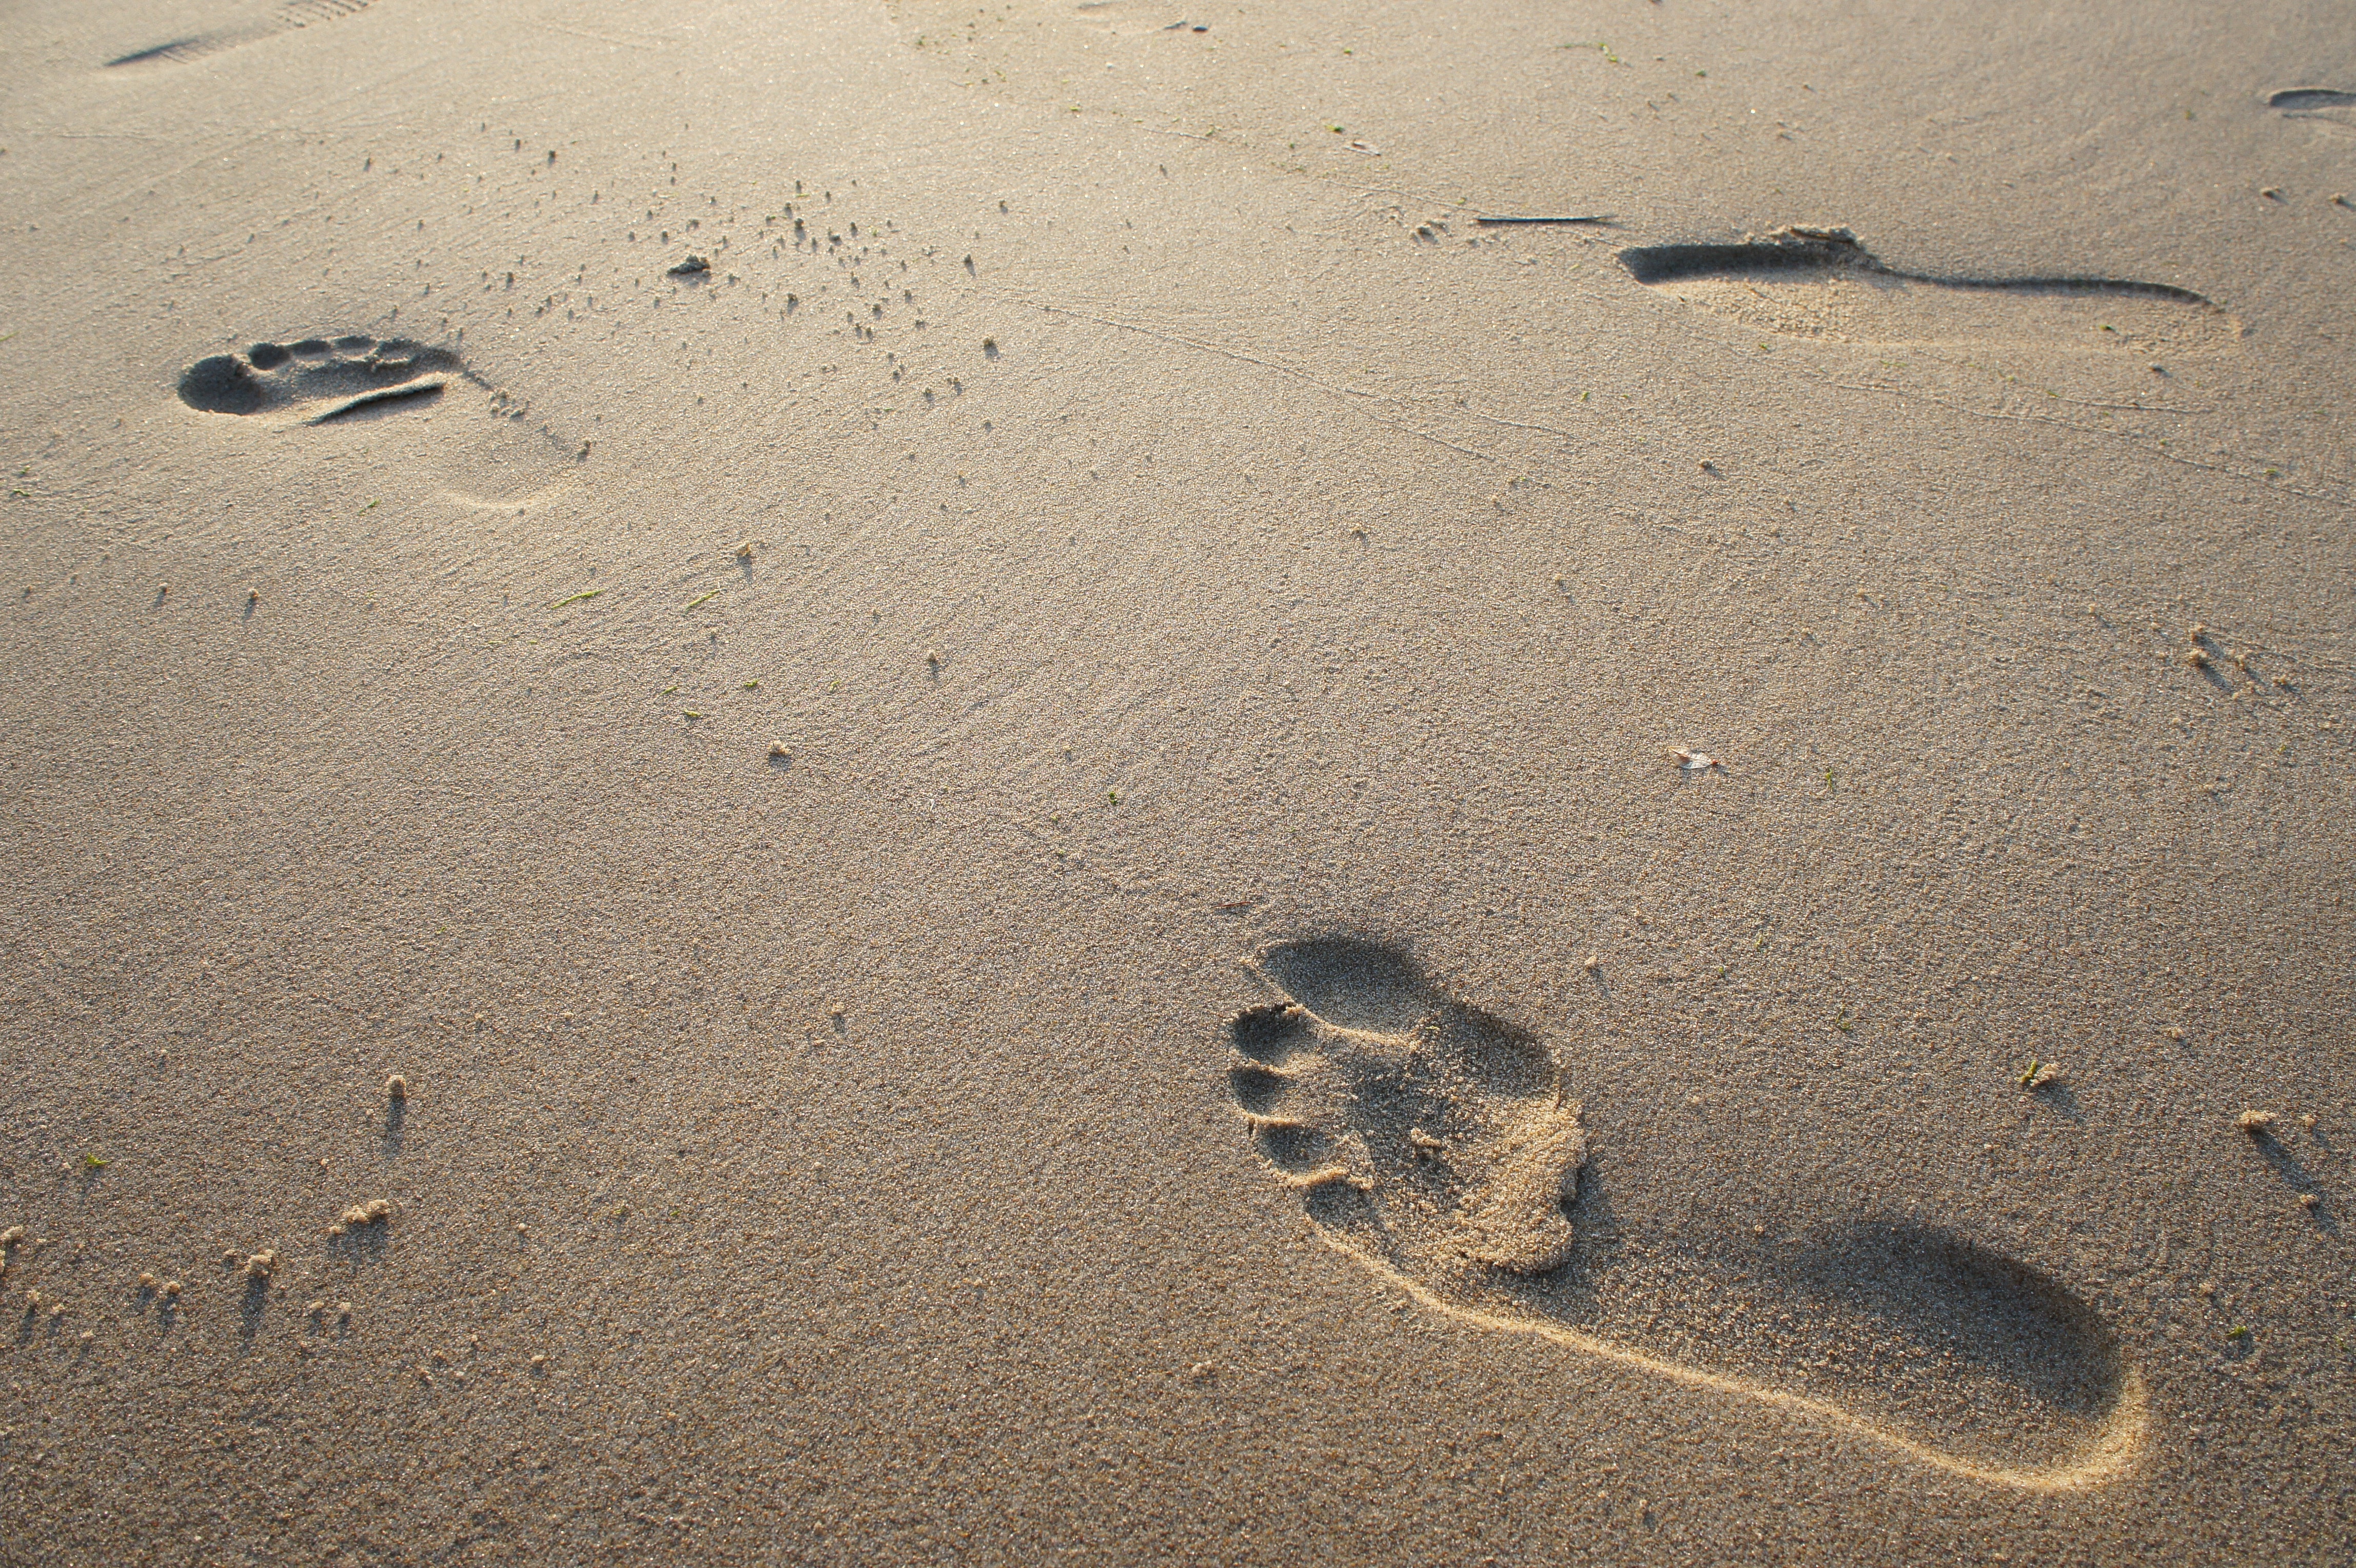 Researchers extracted identifiable genetic information from footprints in the sand. Image: Dim Hou / Unsplash